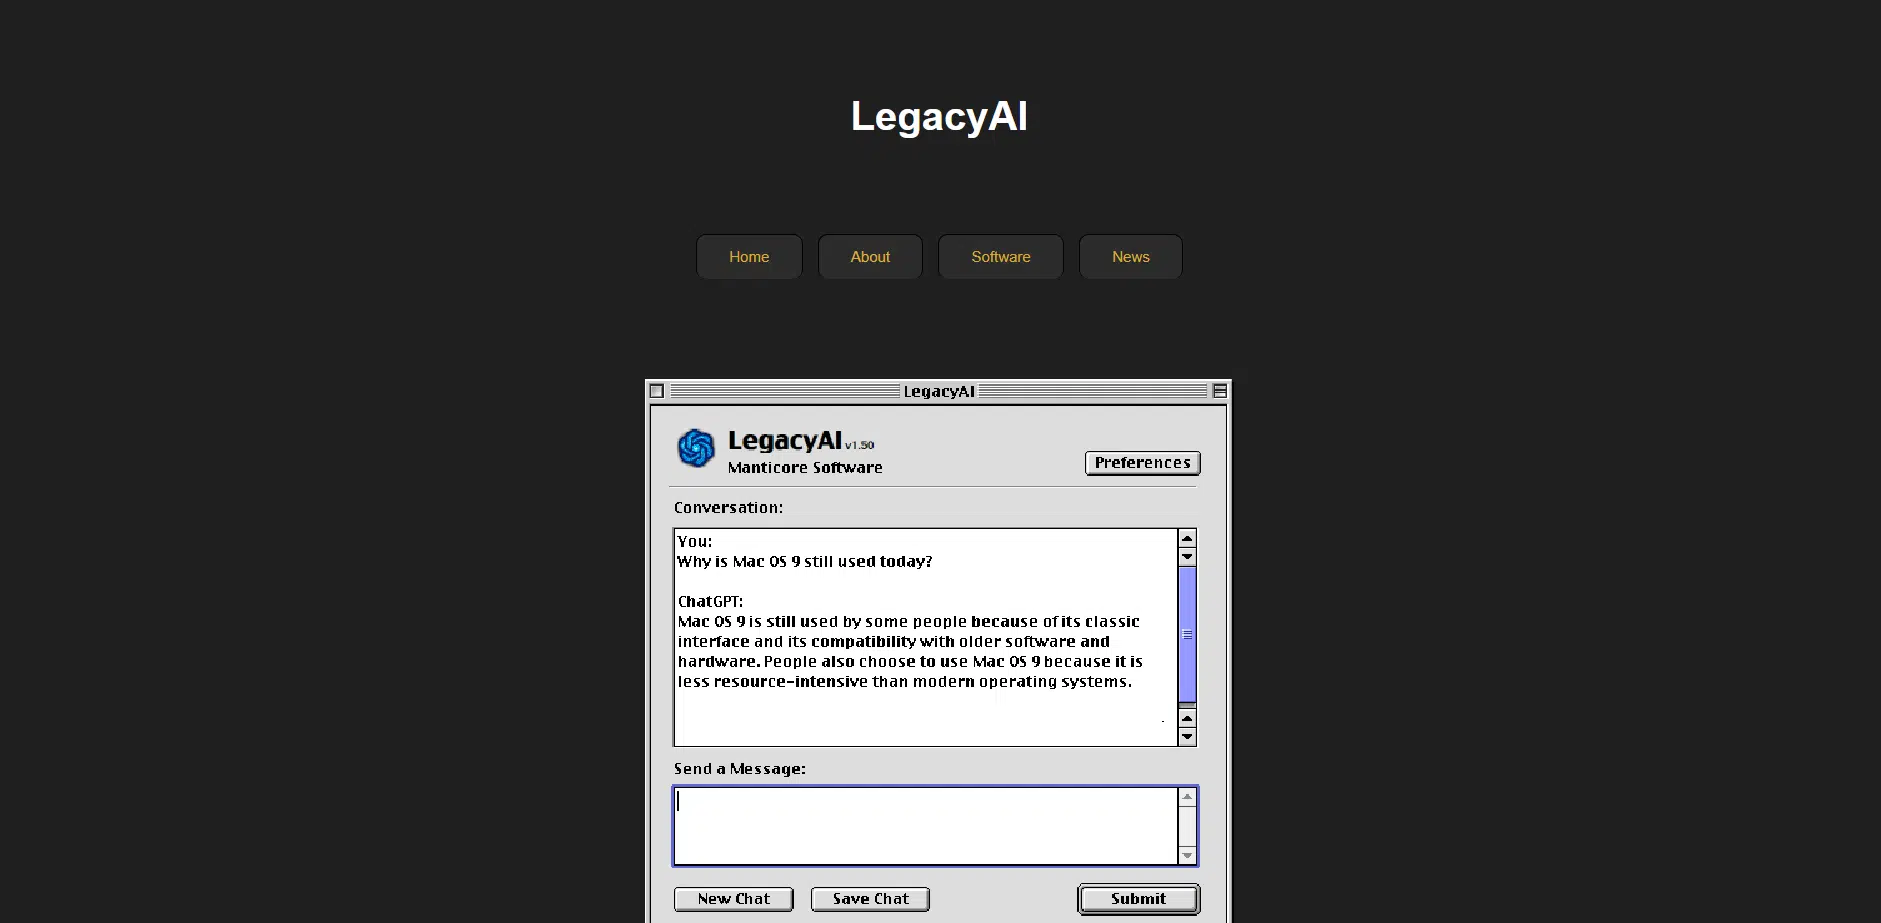 Legacy AIwebsite picture